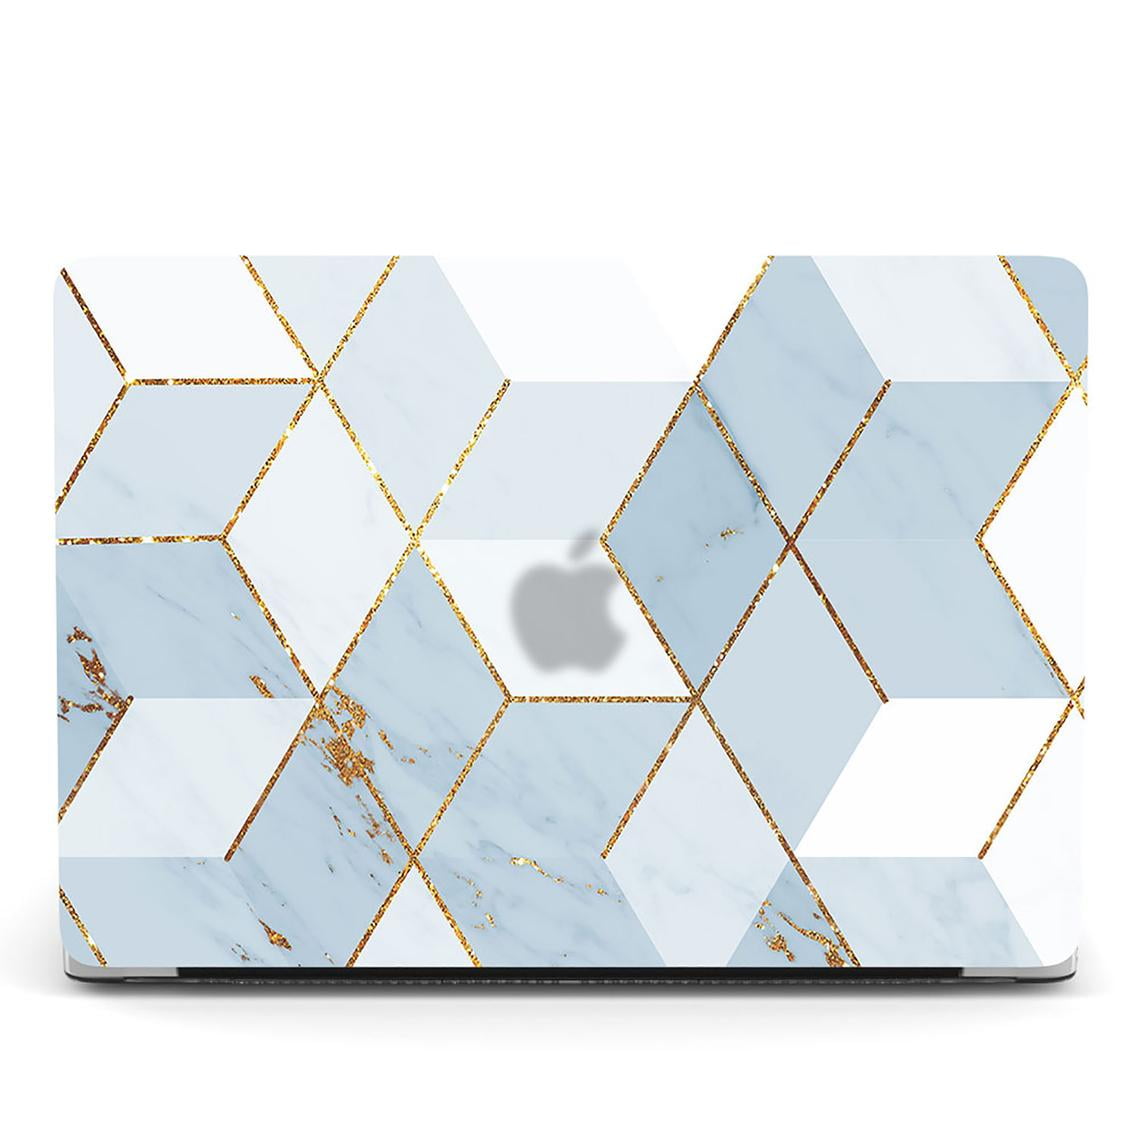 A2159 Macbook Pro Case Colorful Abstract Geometric Design Pro M1 2021 Cover A2485